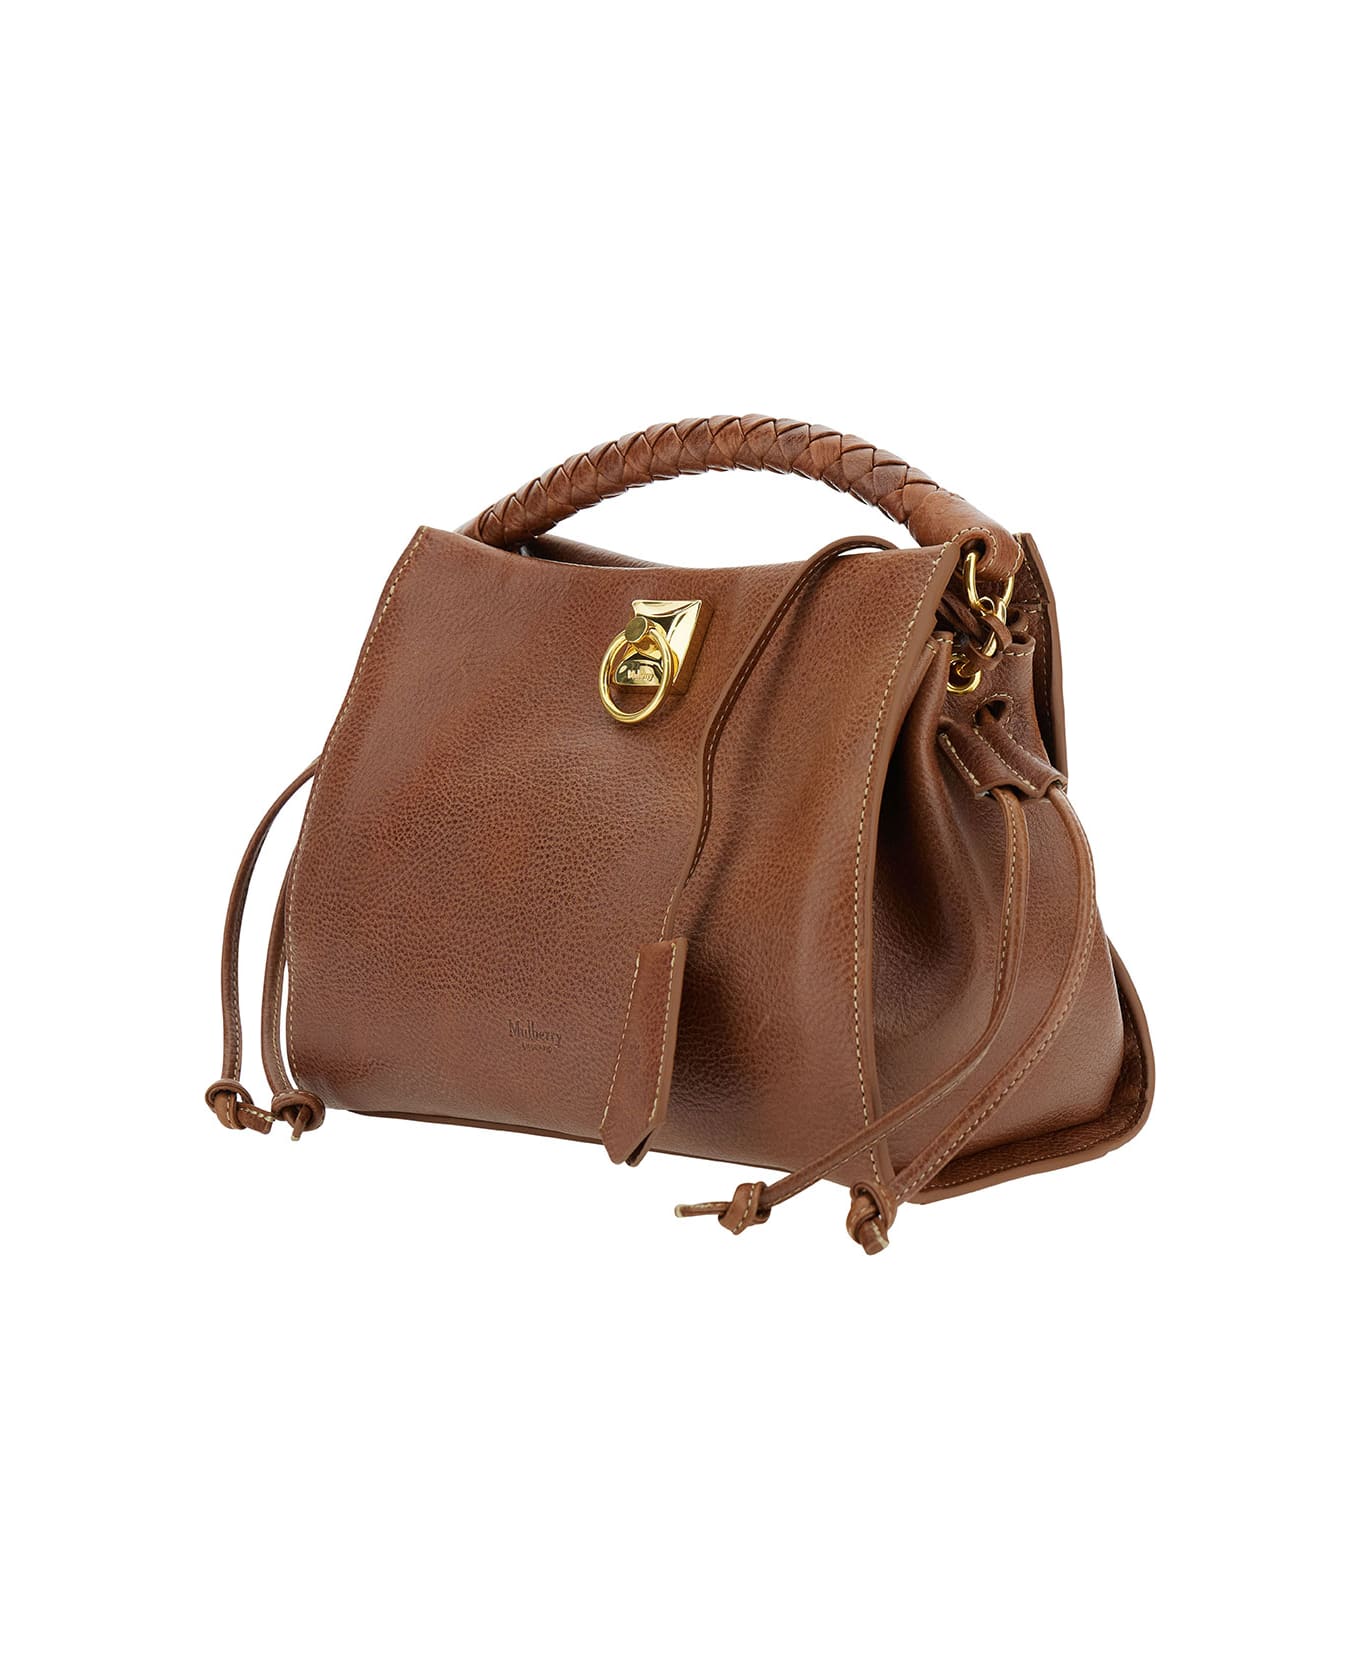 Mulberry 'small Iris' Brown Handbag With Logo Detail In Hammered Leather Woman - Brown